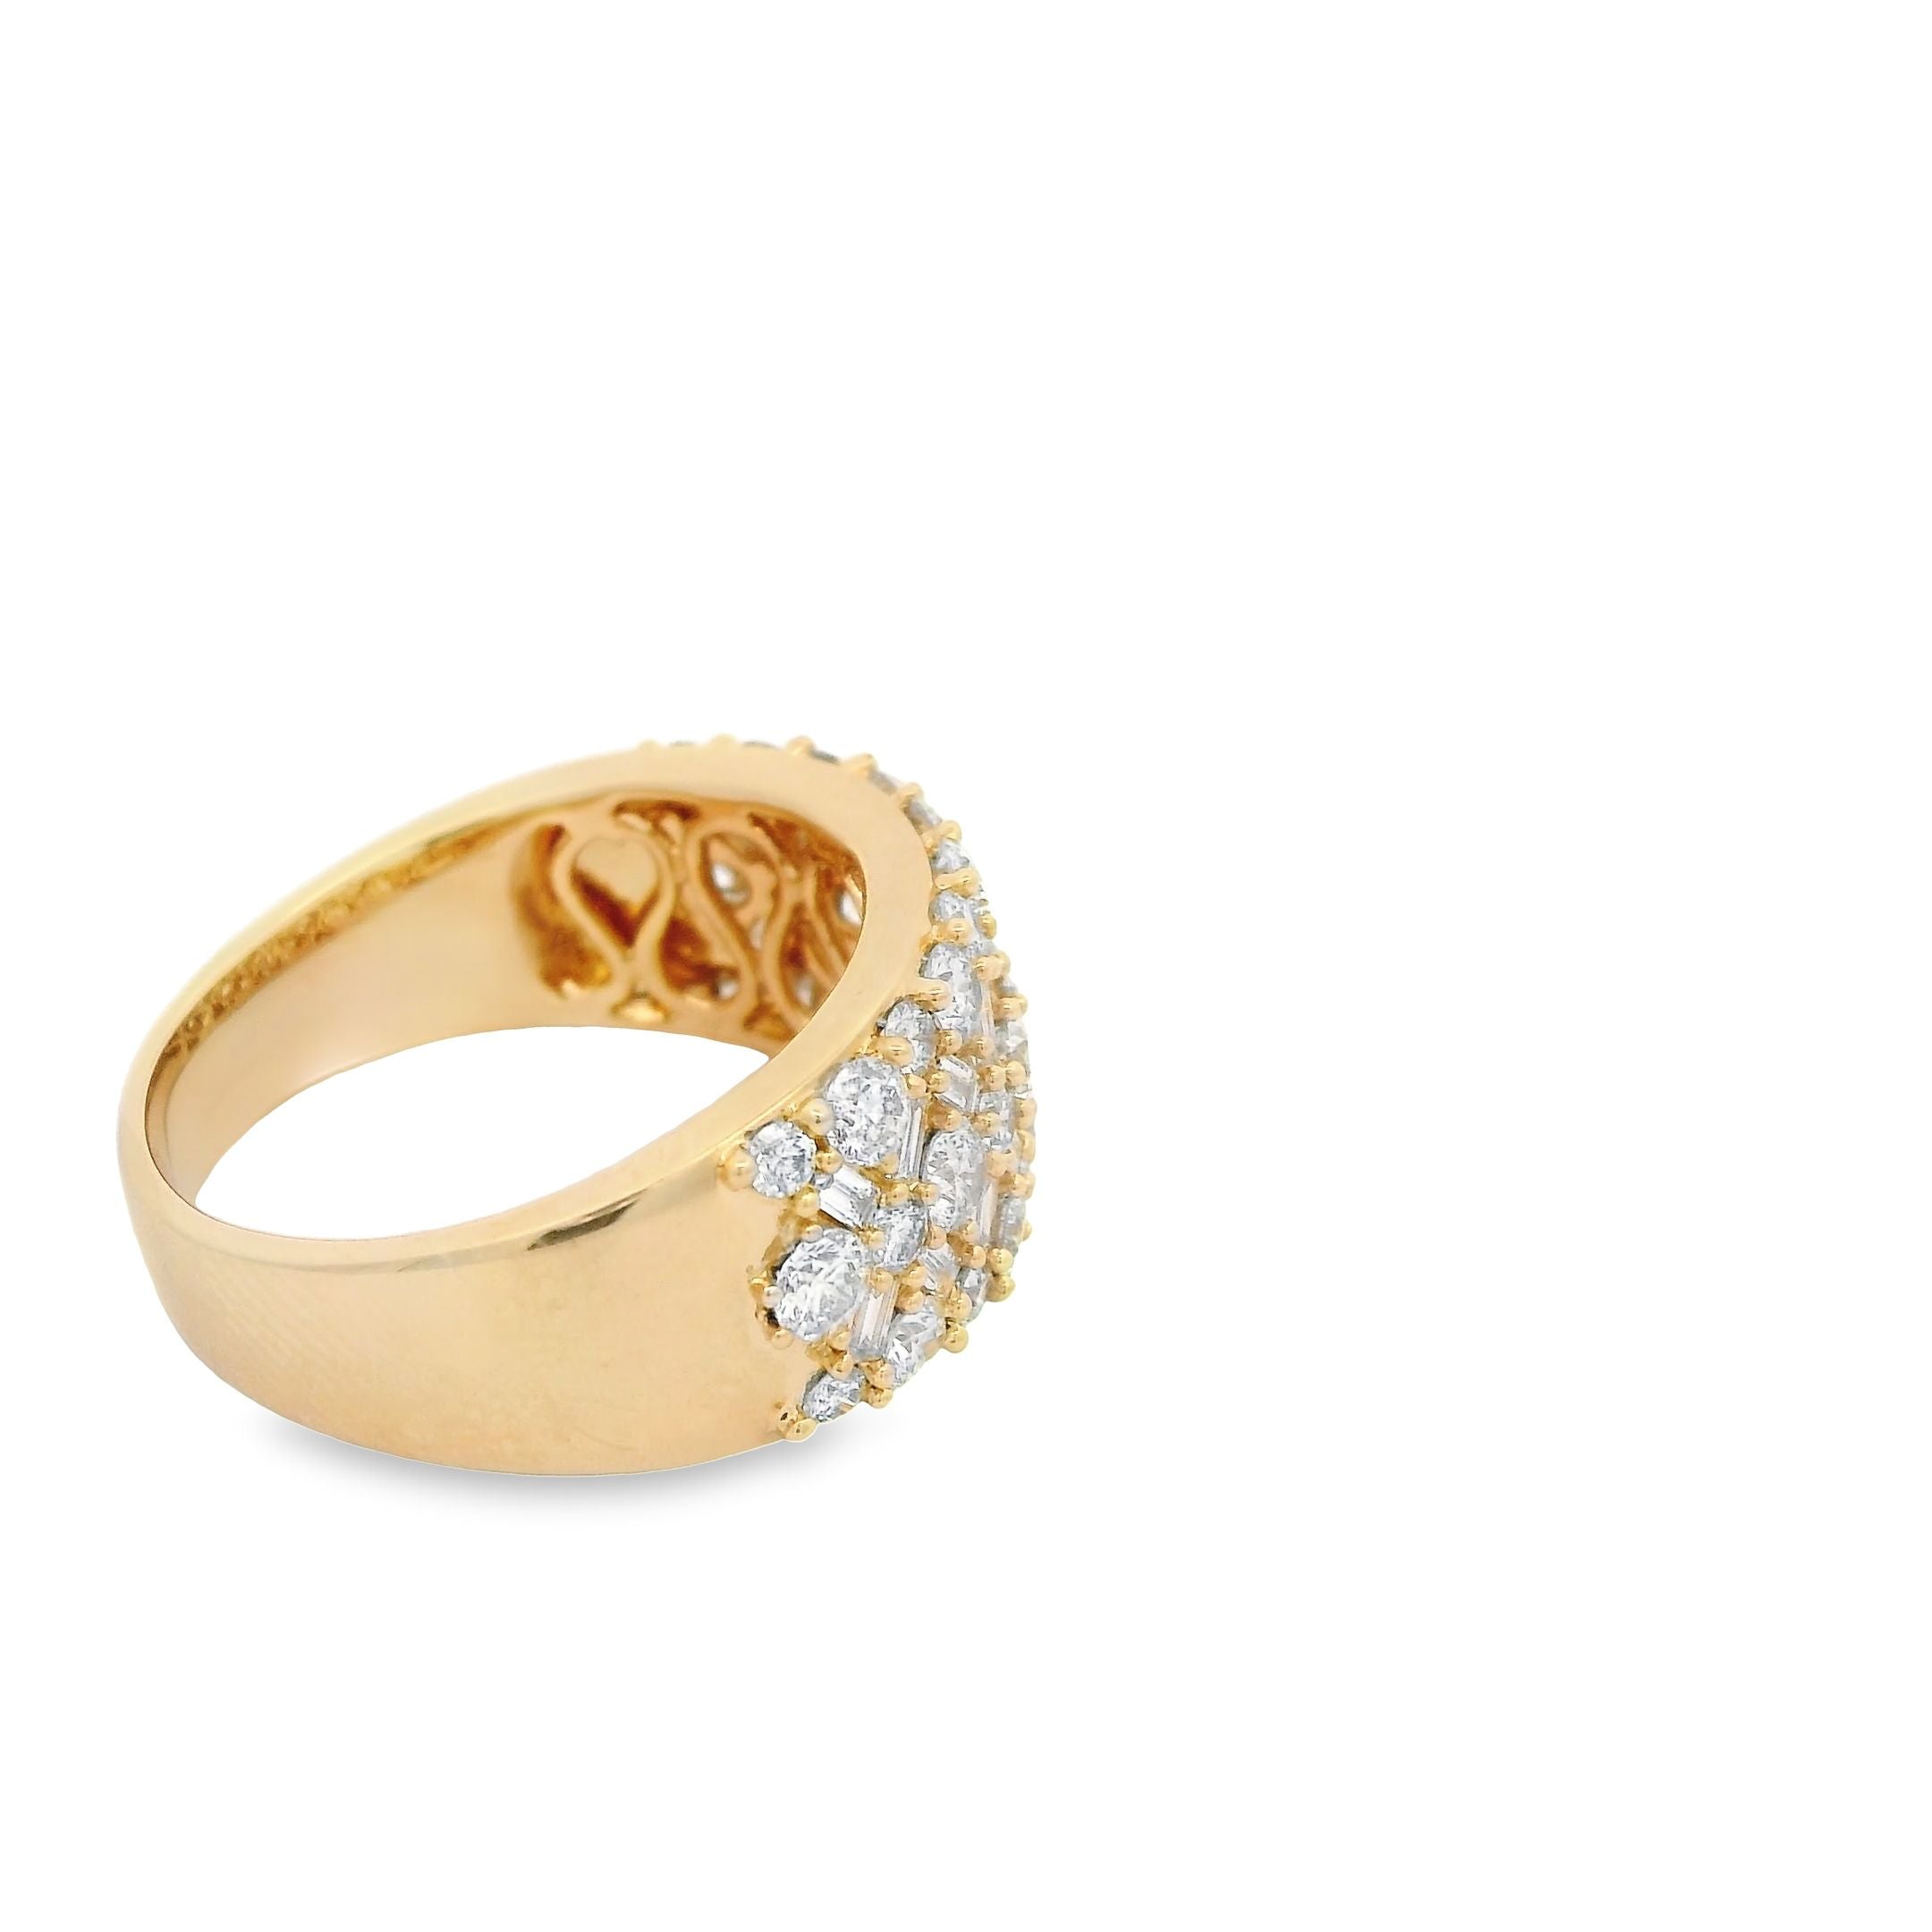 Baguette and Round Diamond Ring 14KY